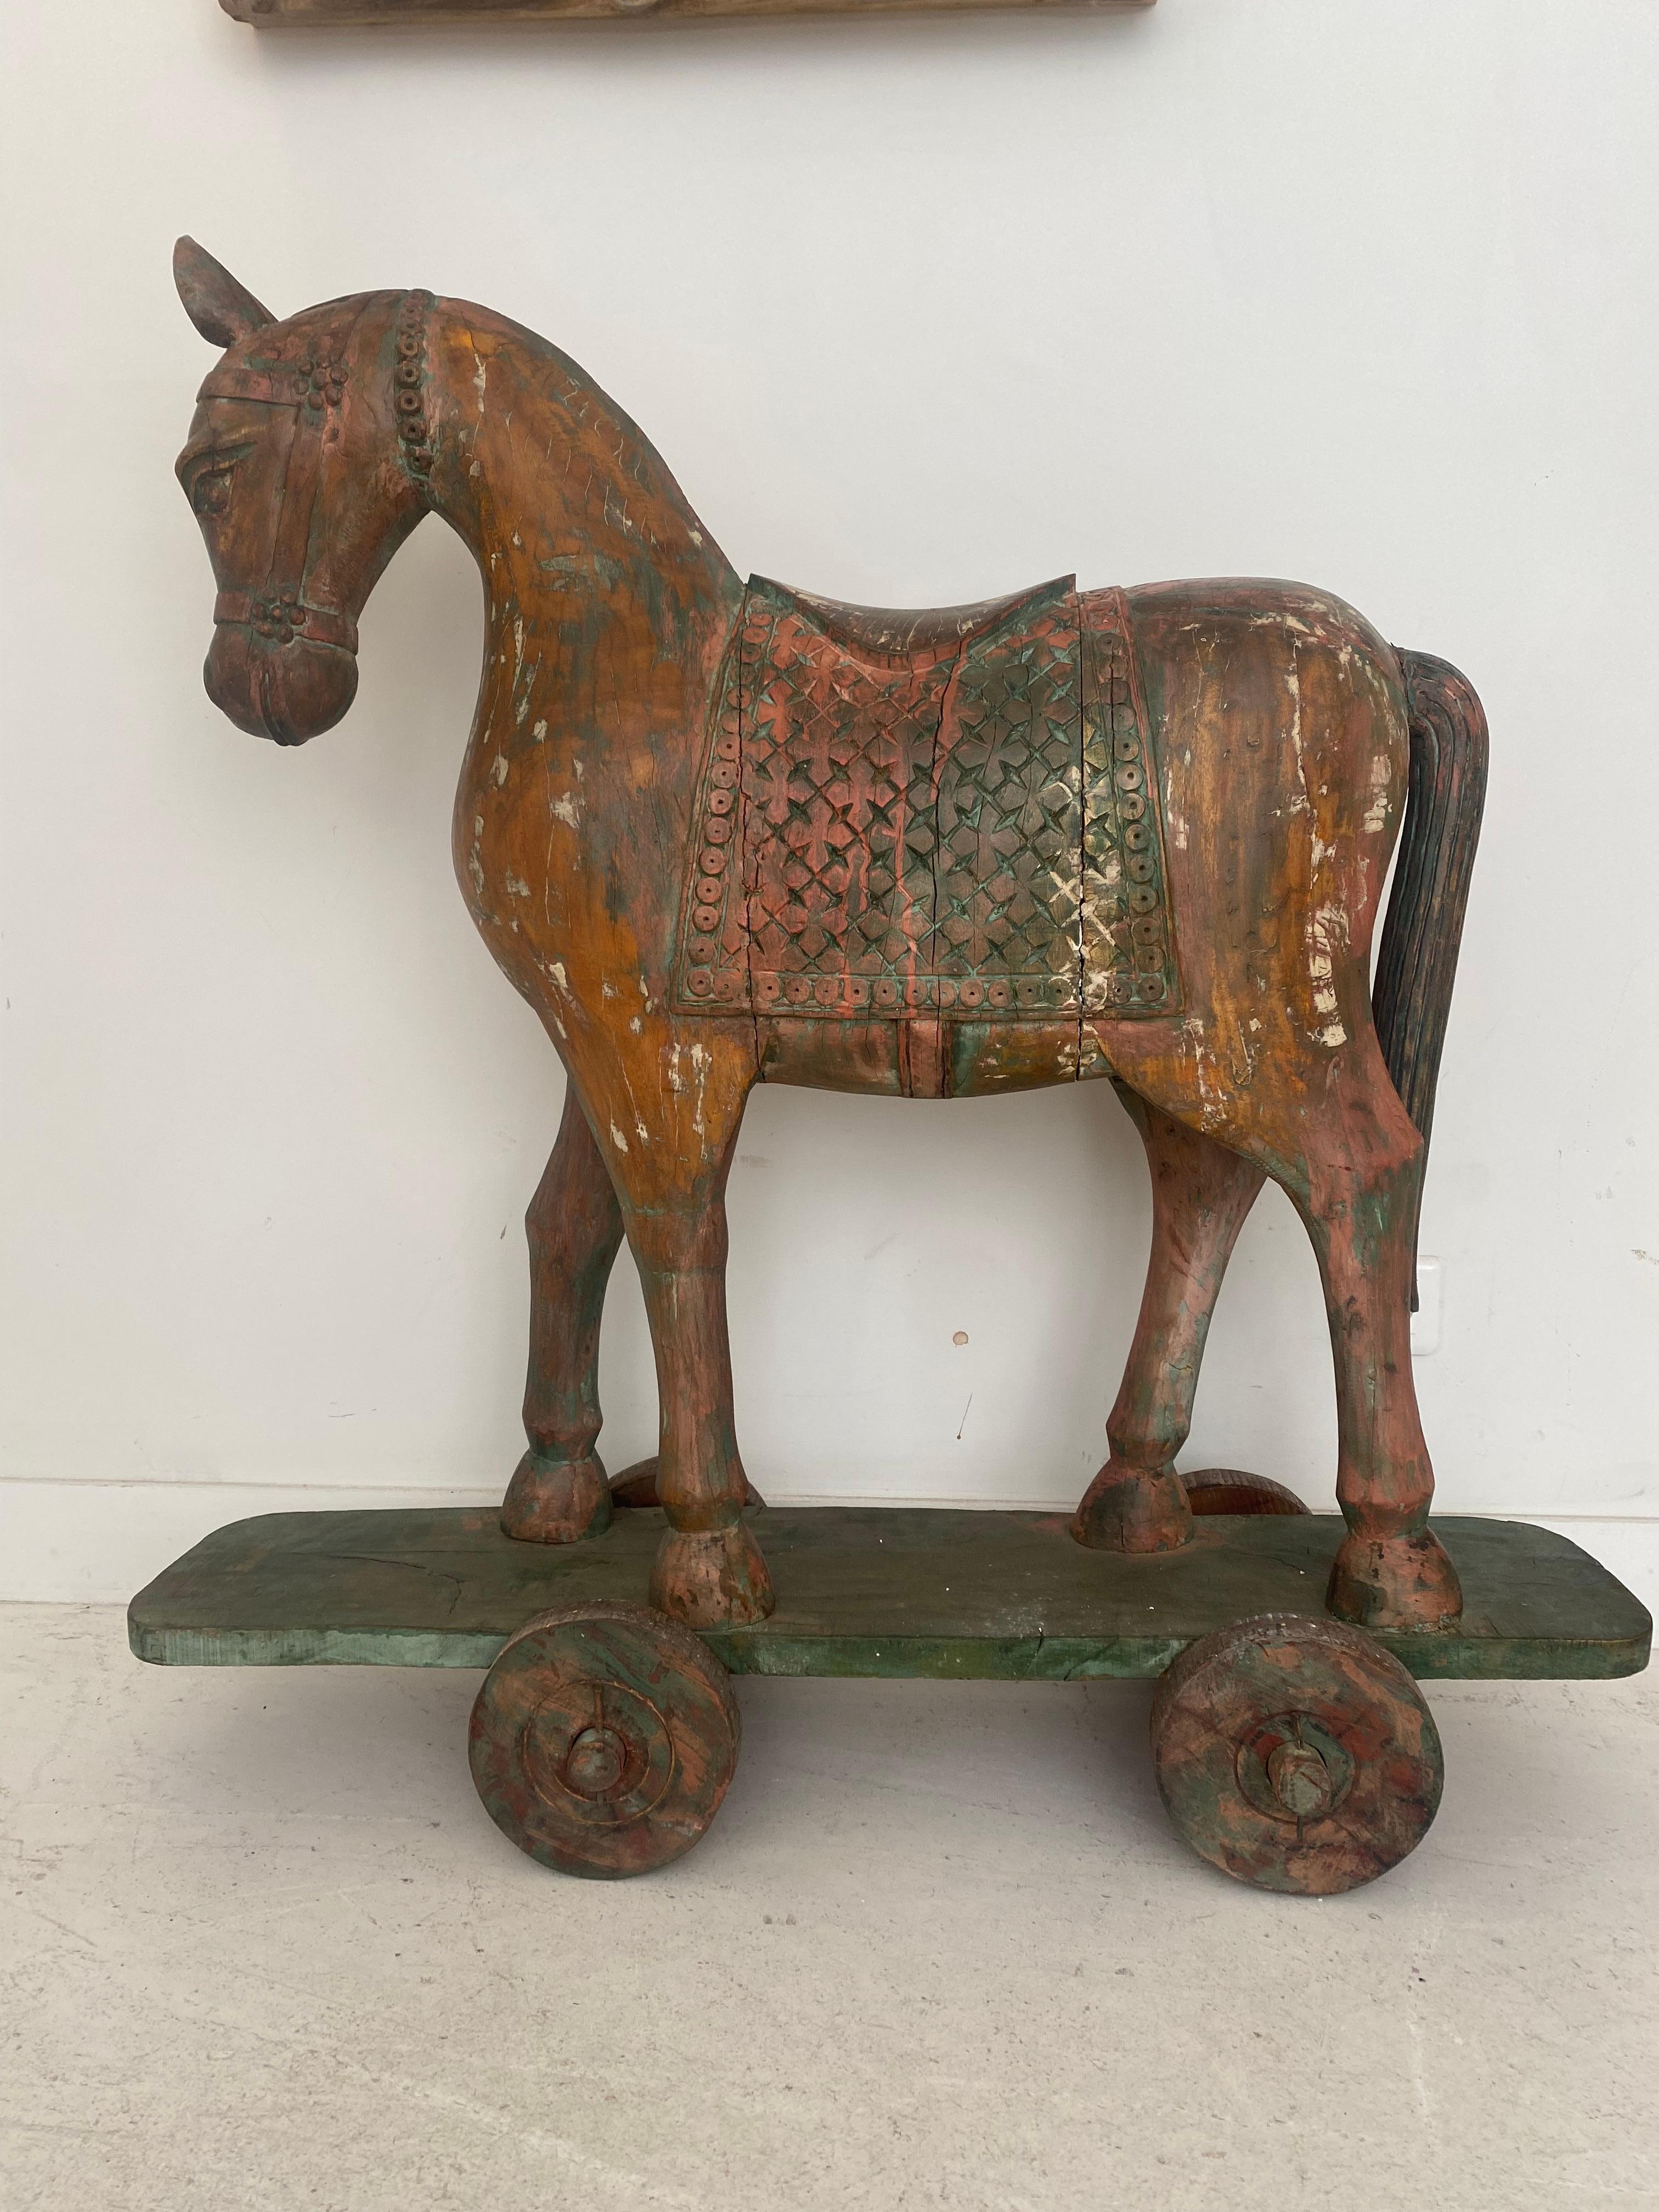 Oversized 20th century wooden Indian temple horse, hand carved and decorated in polychrome, sitting atop a skateboard. Very fine craftsmanship, imposing temple horse sculpture.
Arts and crafts, folk art Decorative ceremonial horse.
Anglo Raj toys